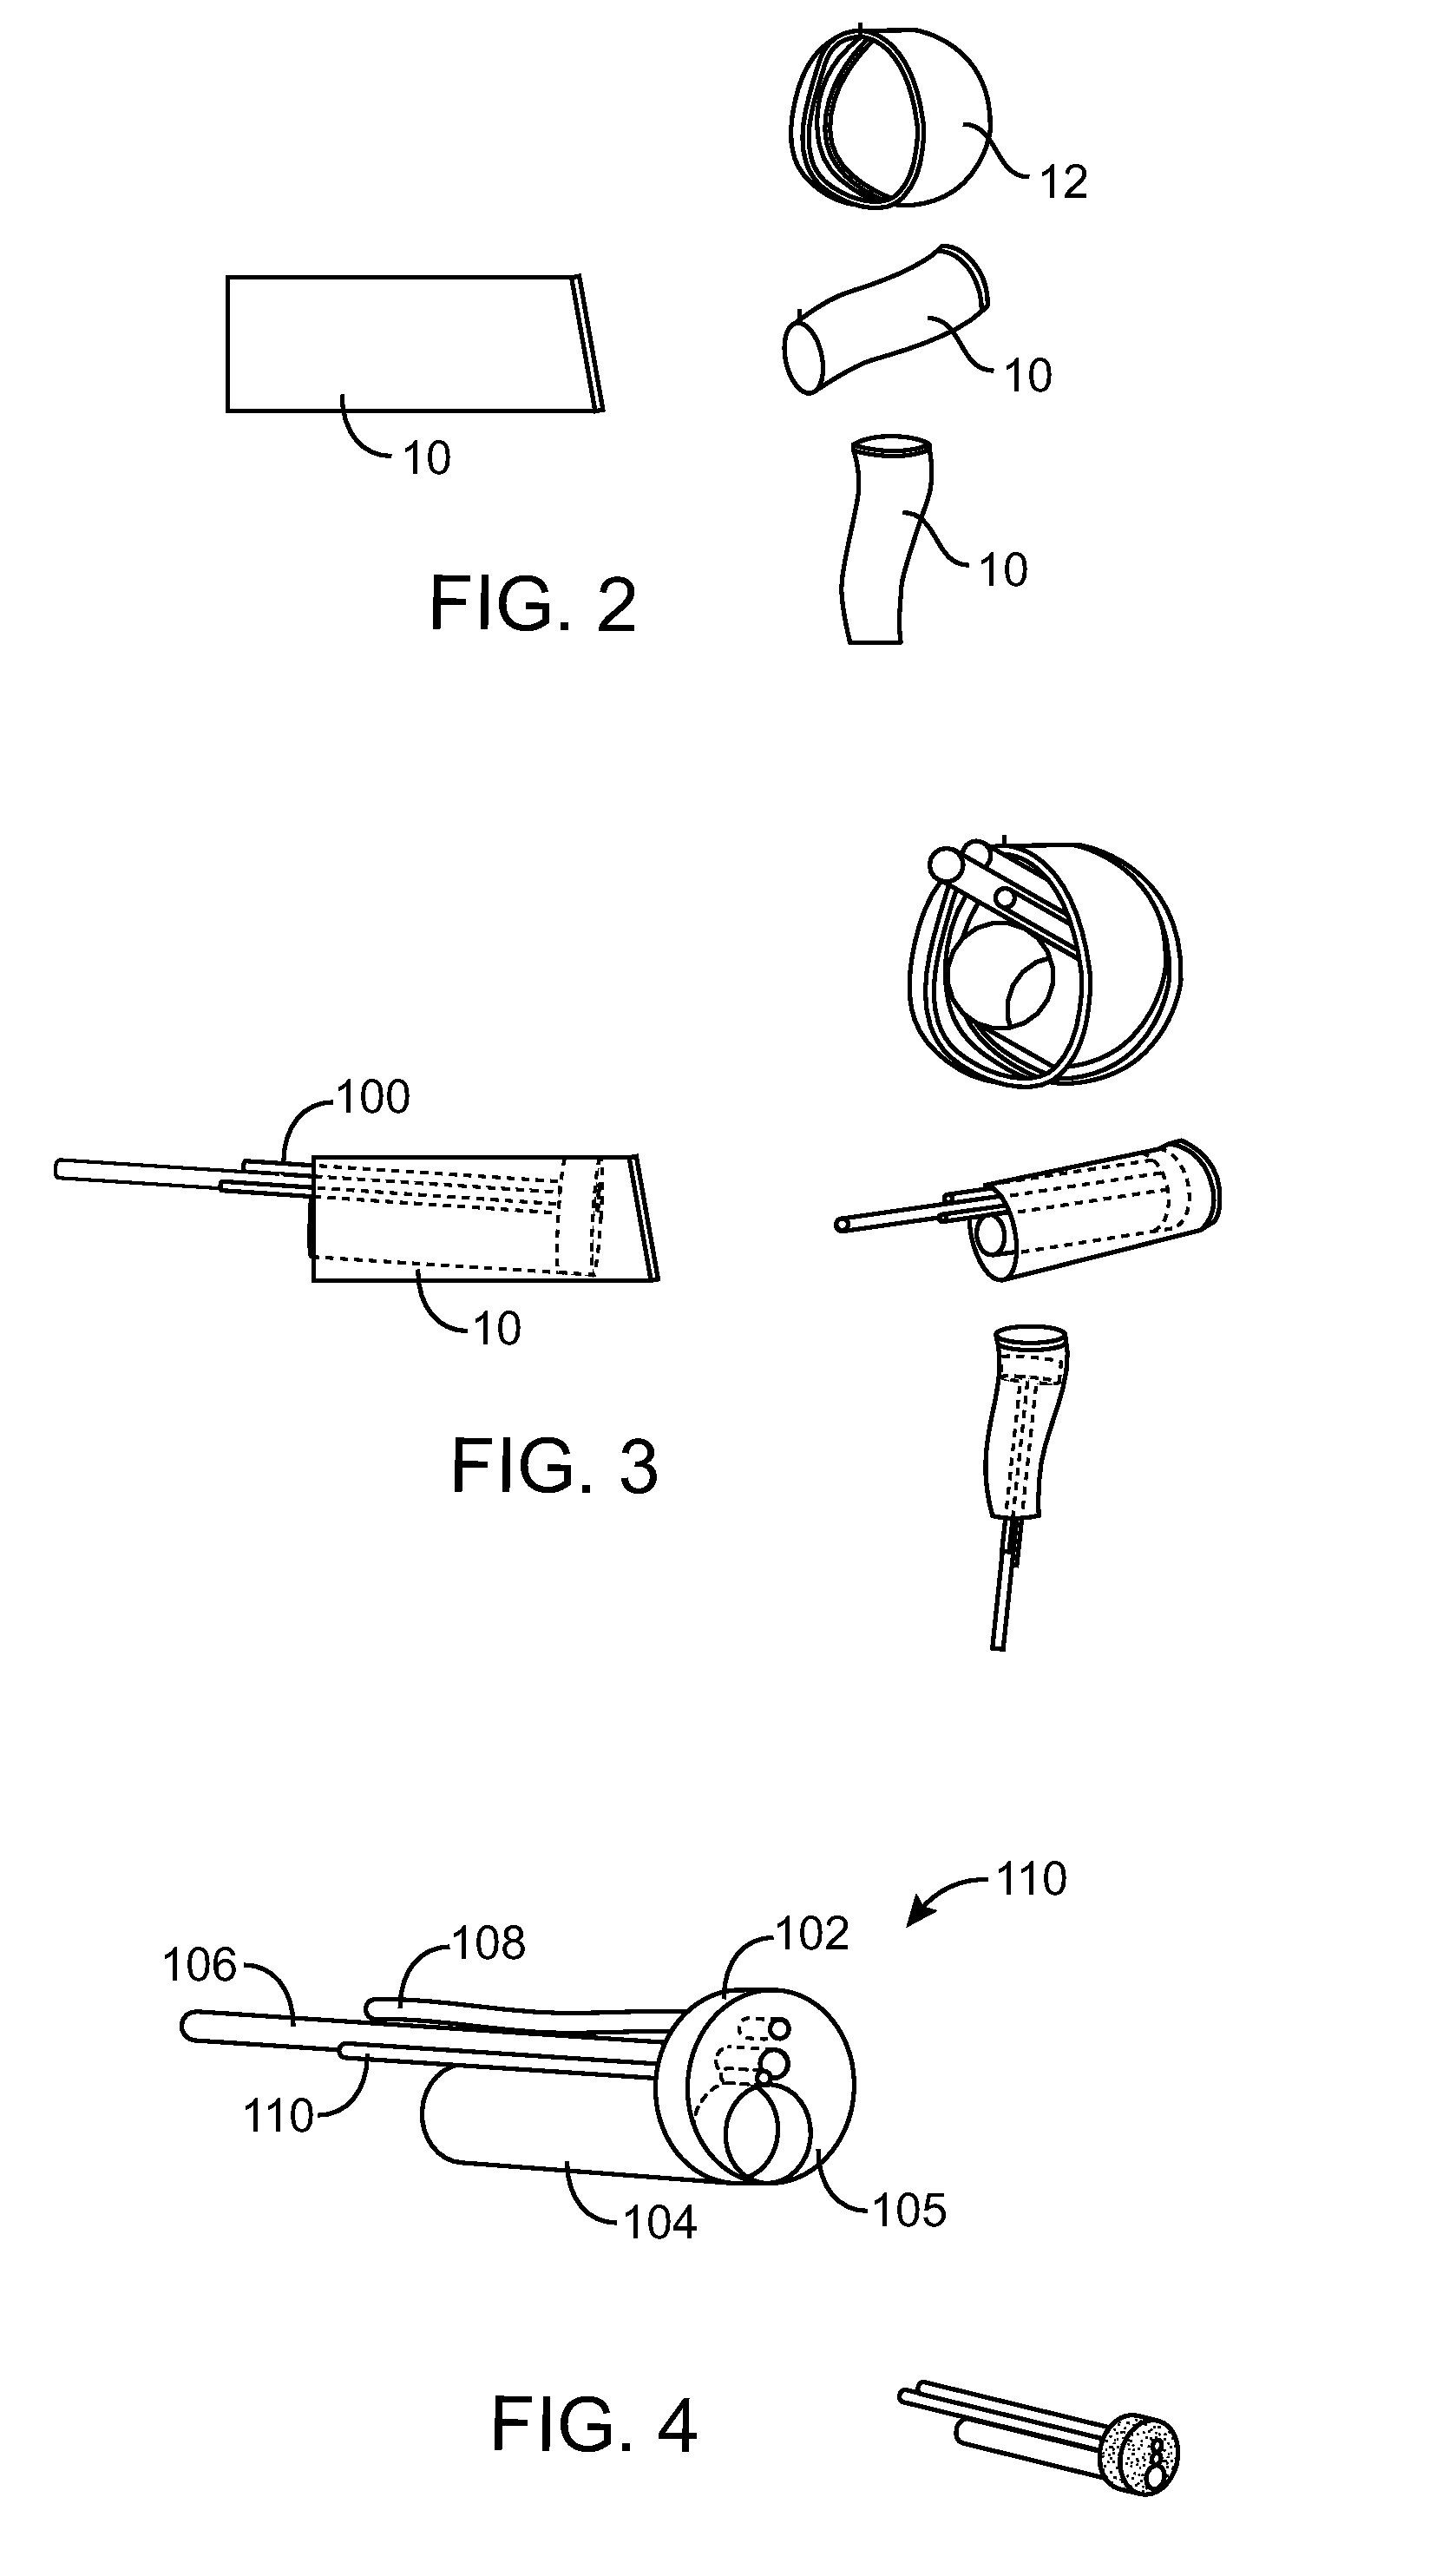 System and Method for the Simultaneous Bilateral Placement of Pressure Equalization Tubes